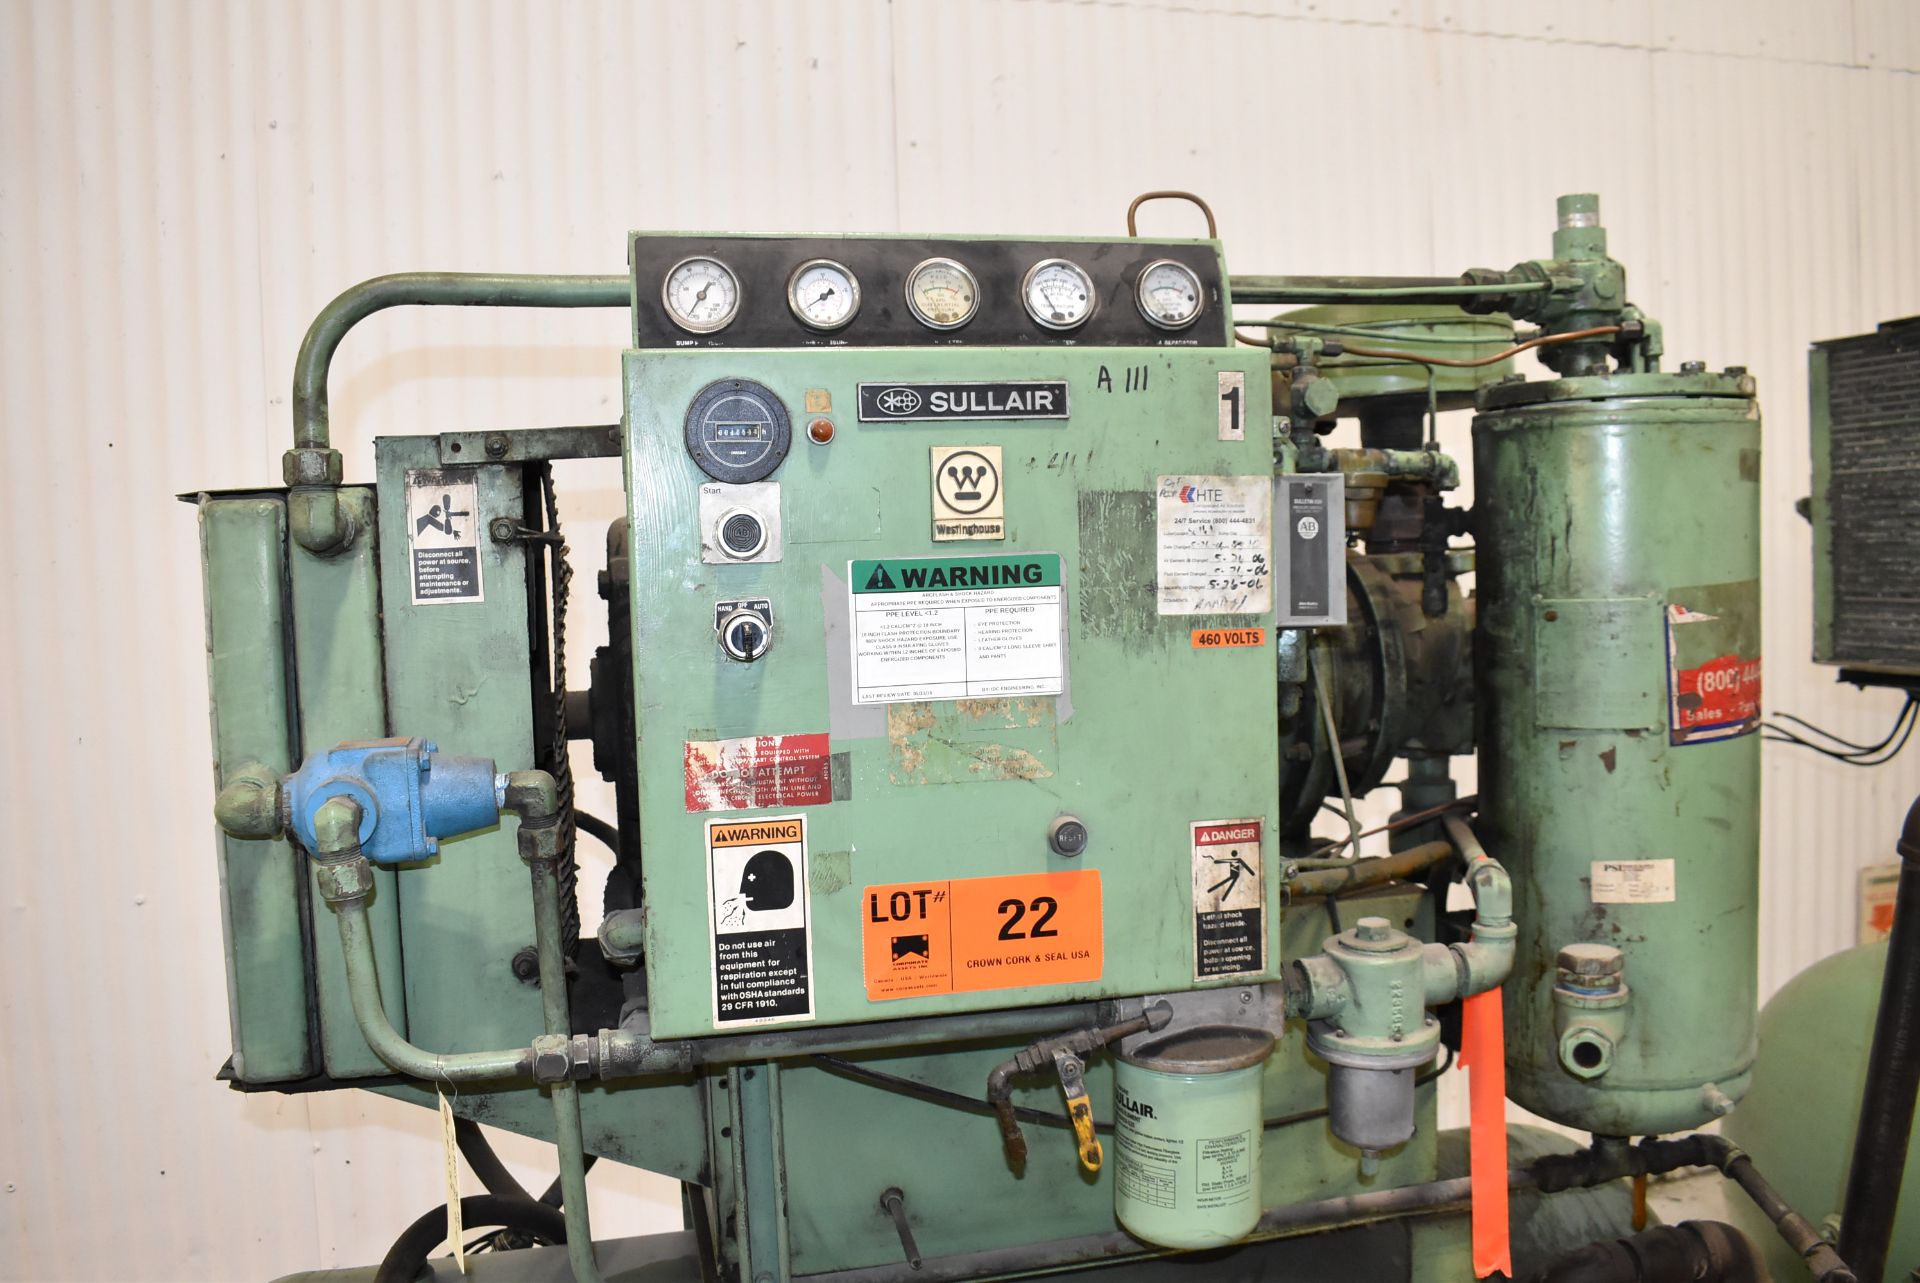 SULLAIR 10B-30 30HP ROTARY SCREW TANK MOUNTED COMPRESSOR, 405HRS ON METER, S/N 003-60410 - Image 2 of 7